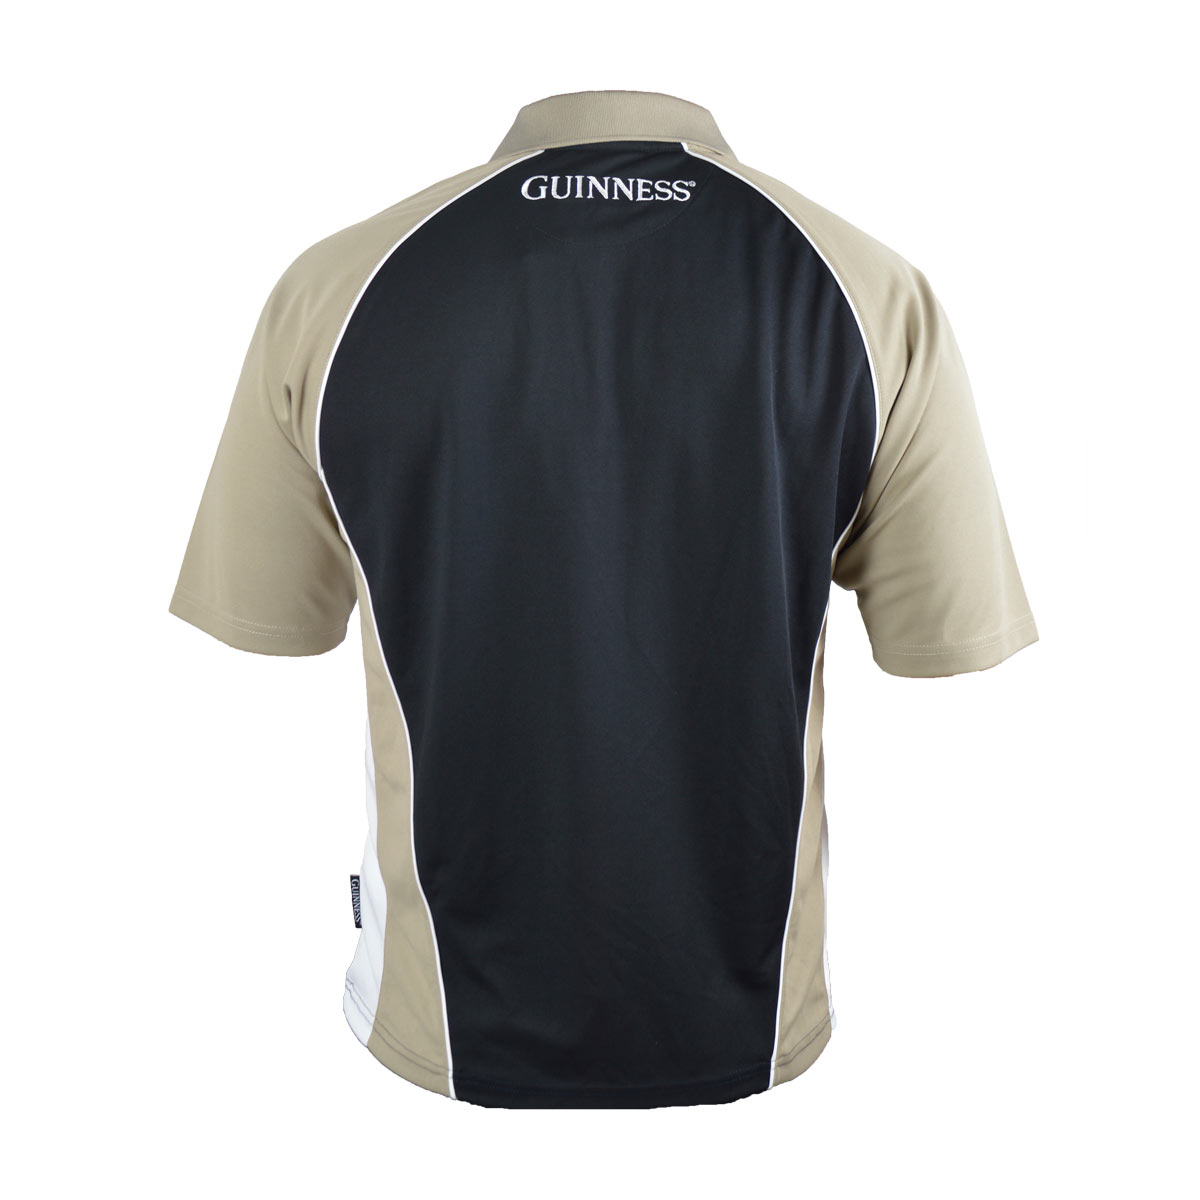 The back of a men's Guinness UK Performance Panelled Golf Shirt made with moisture wicking fabric.